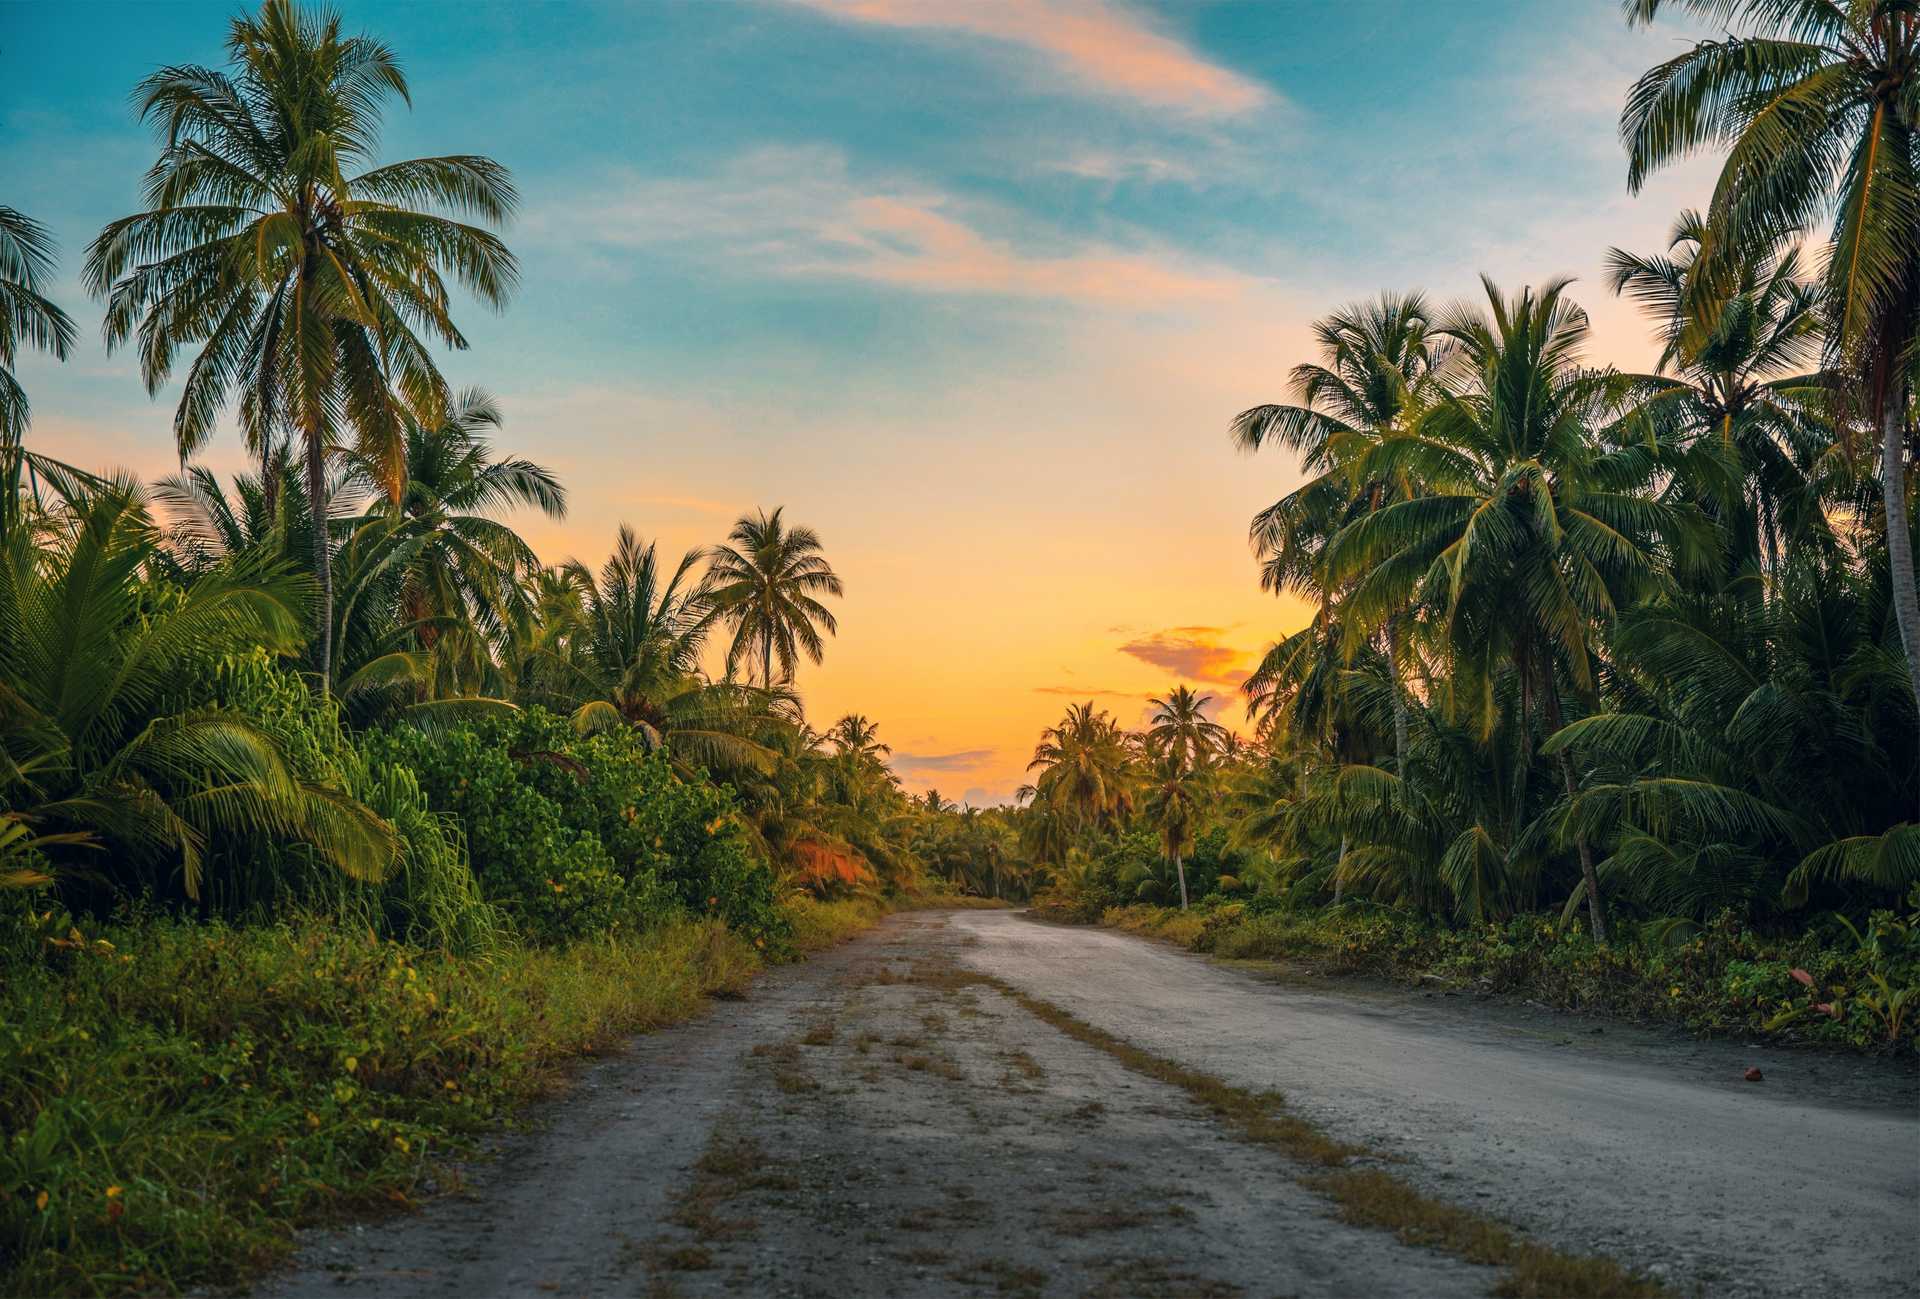 Photography of Dirt Road Surrounded by Palm Trees